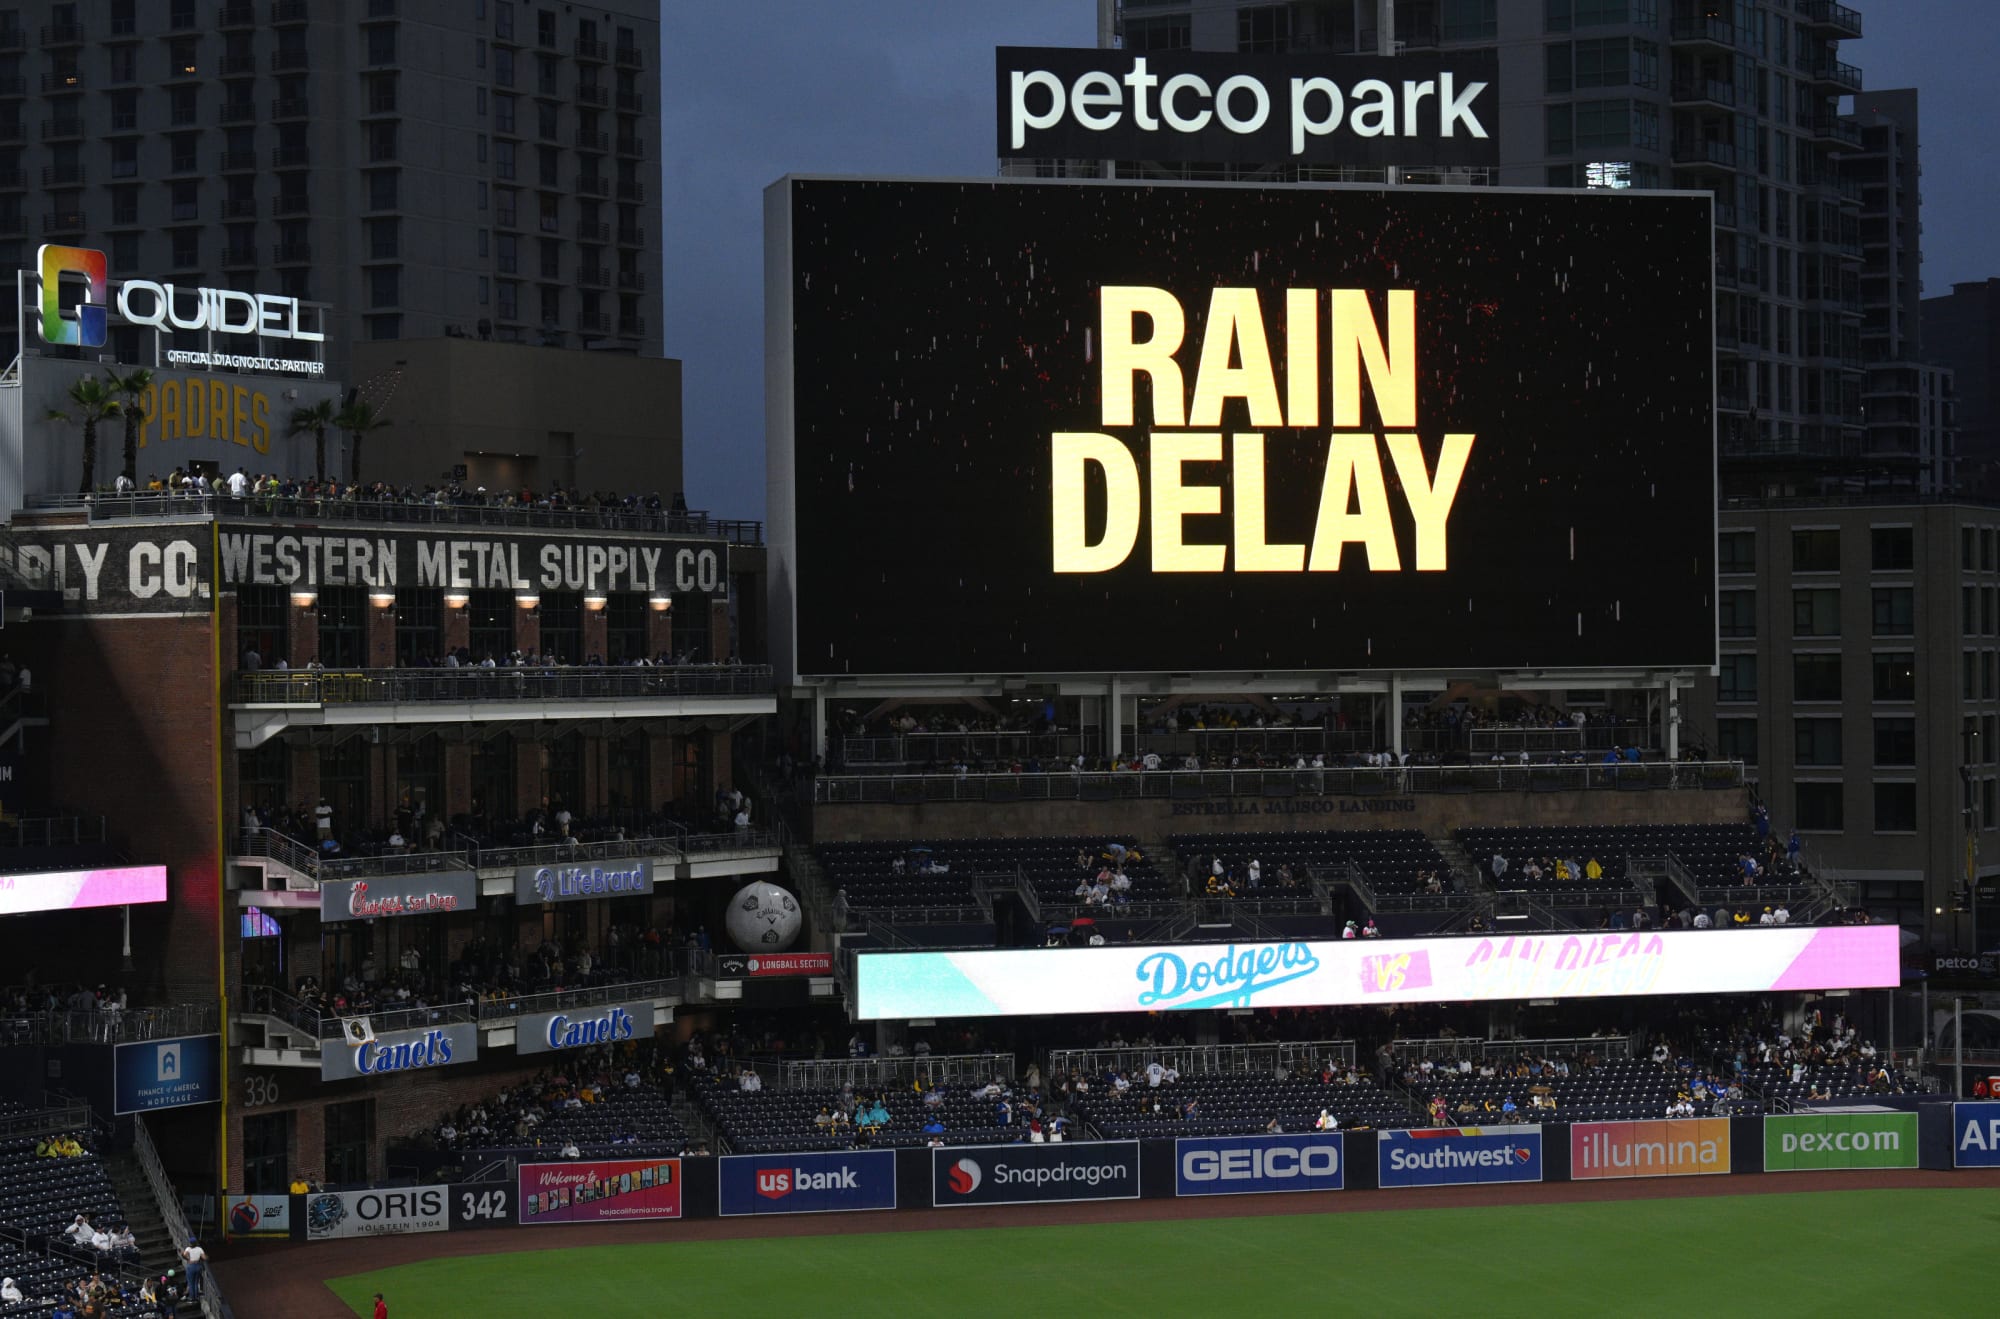 Rules for a Baseball Game in a Rainout  SportsRec